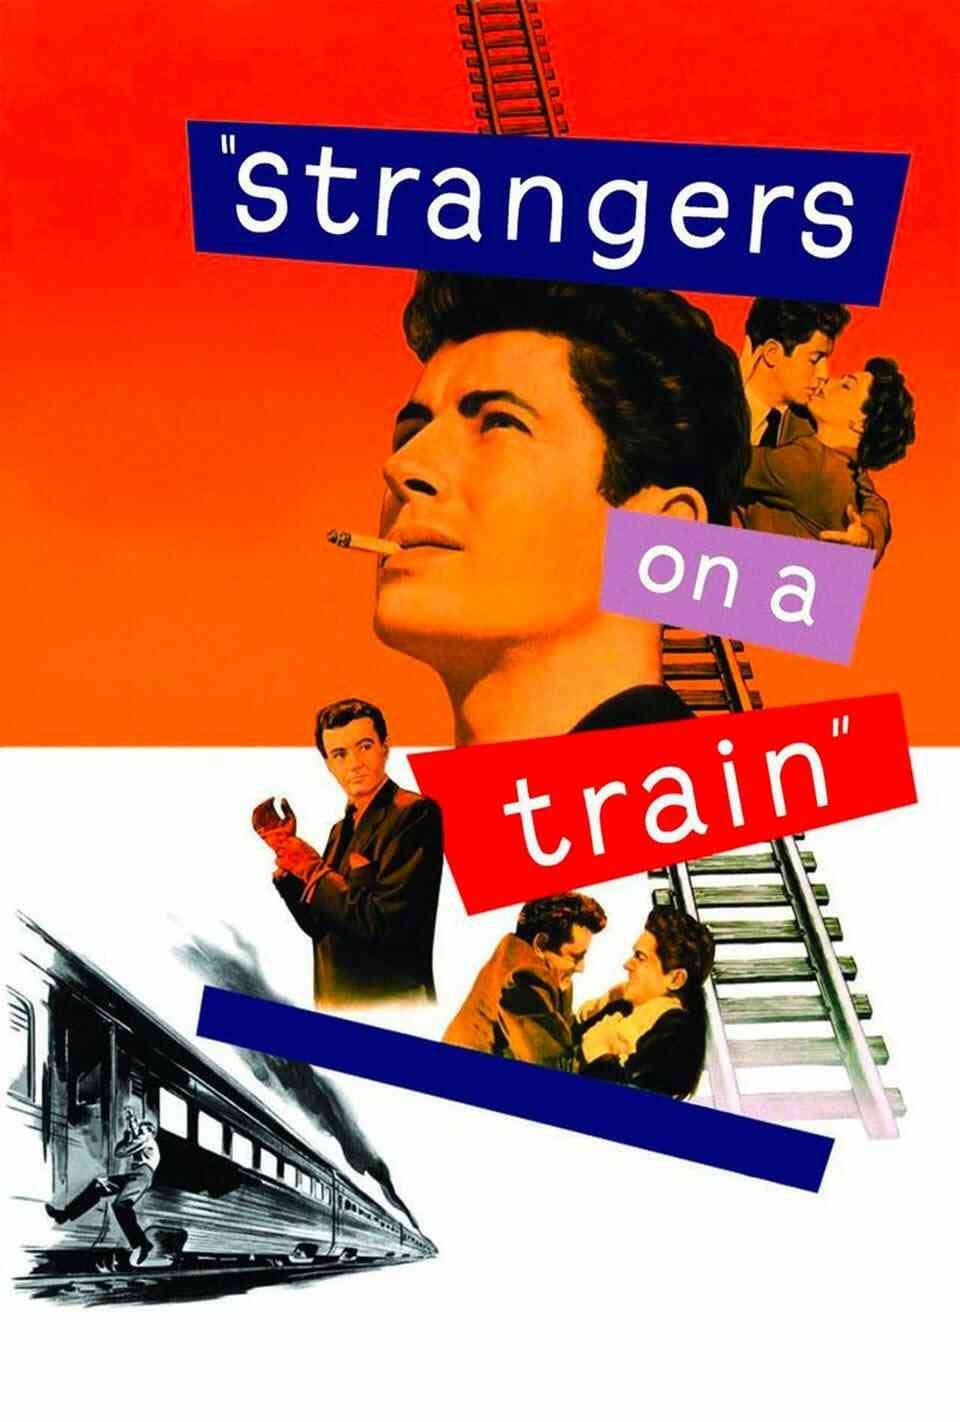 Read Strangers on a Train screenplay (poster)